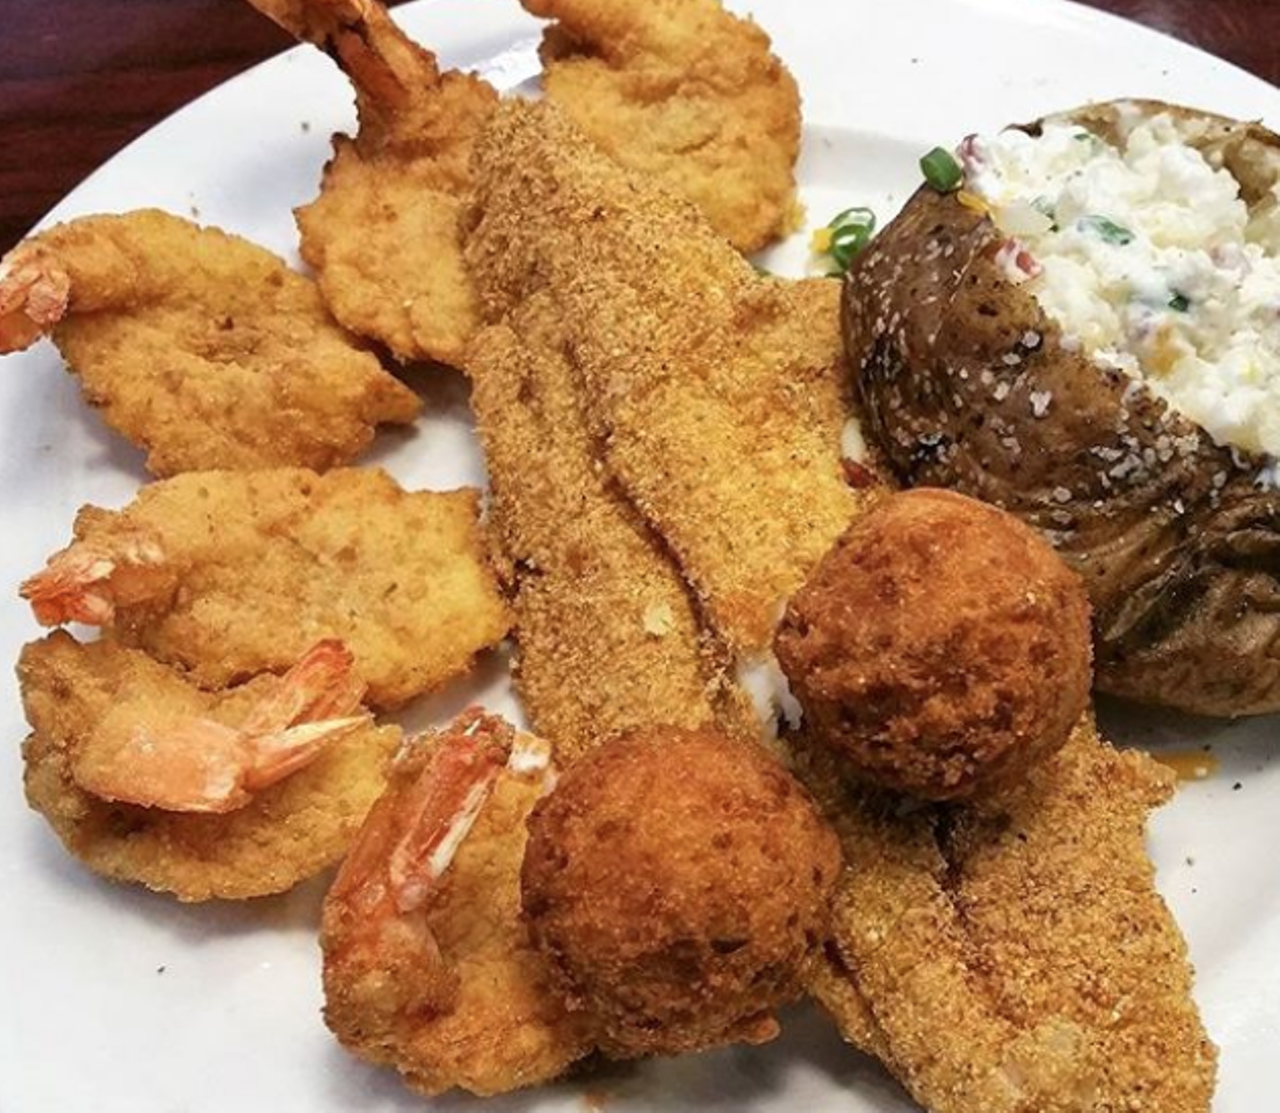 River City Seafood & Grill
Stone Oak lost this seafood restaurant in February, a close that came after the business filed for bankruptcy. River City Seafood had opened in 2012.
Photo via Instagram / flicksandfood